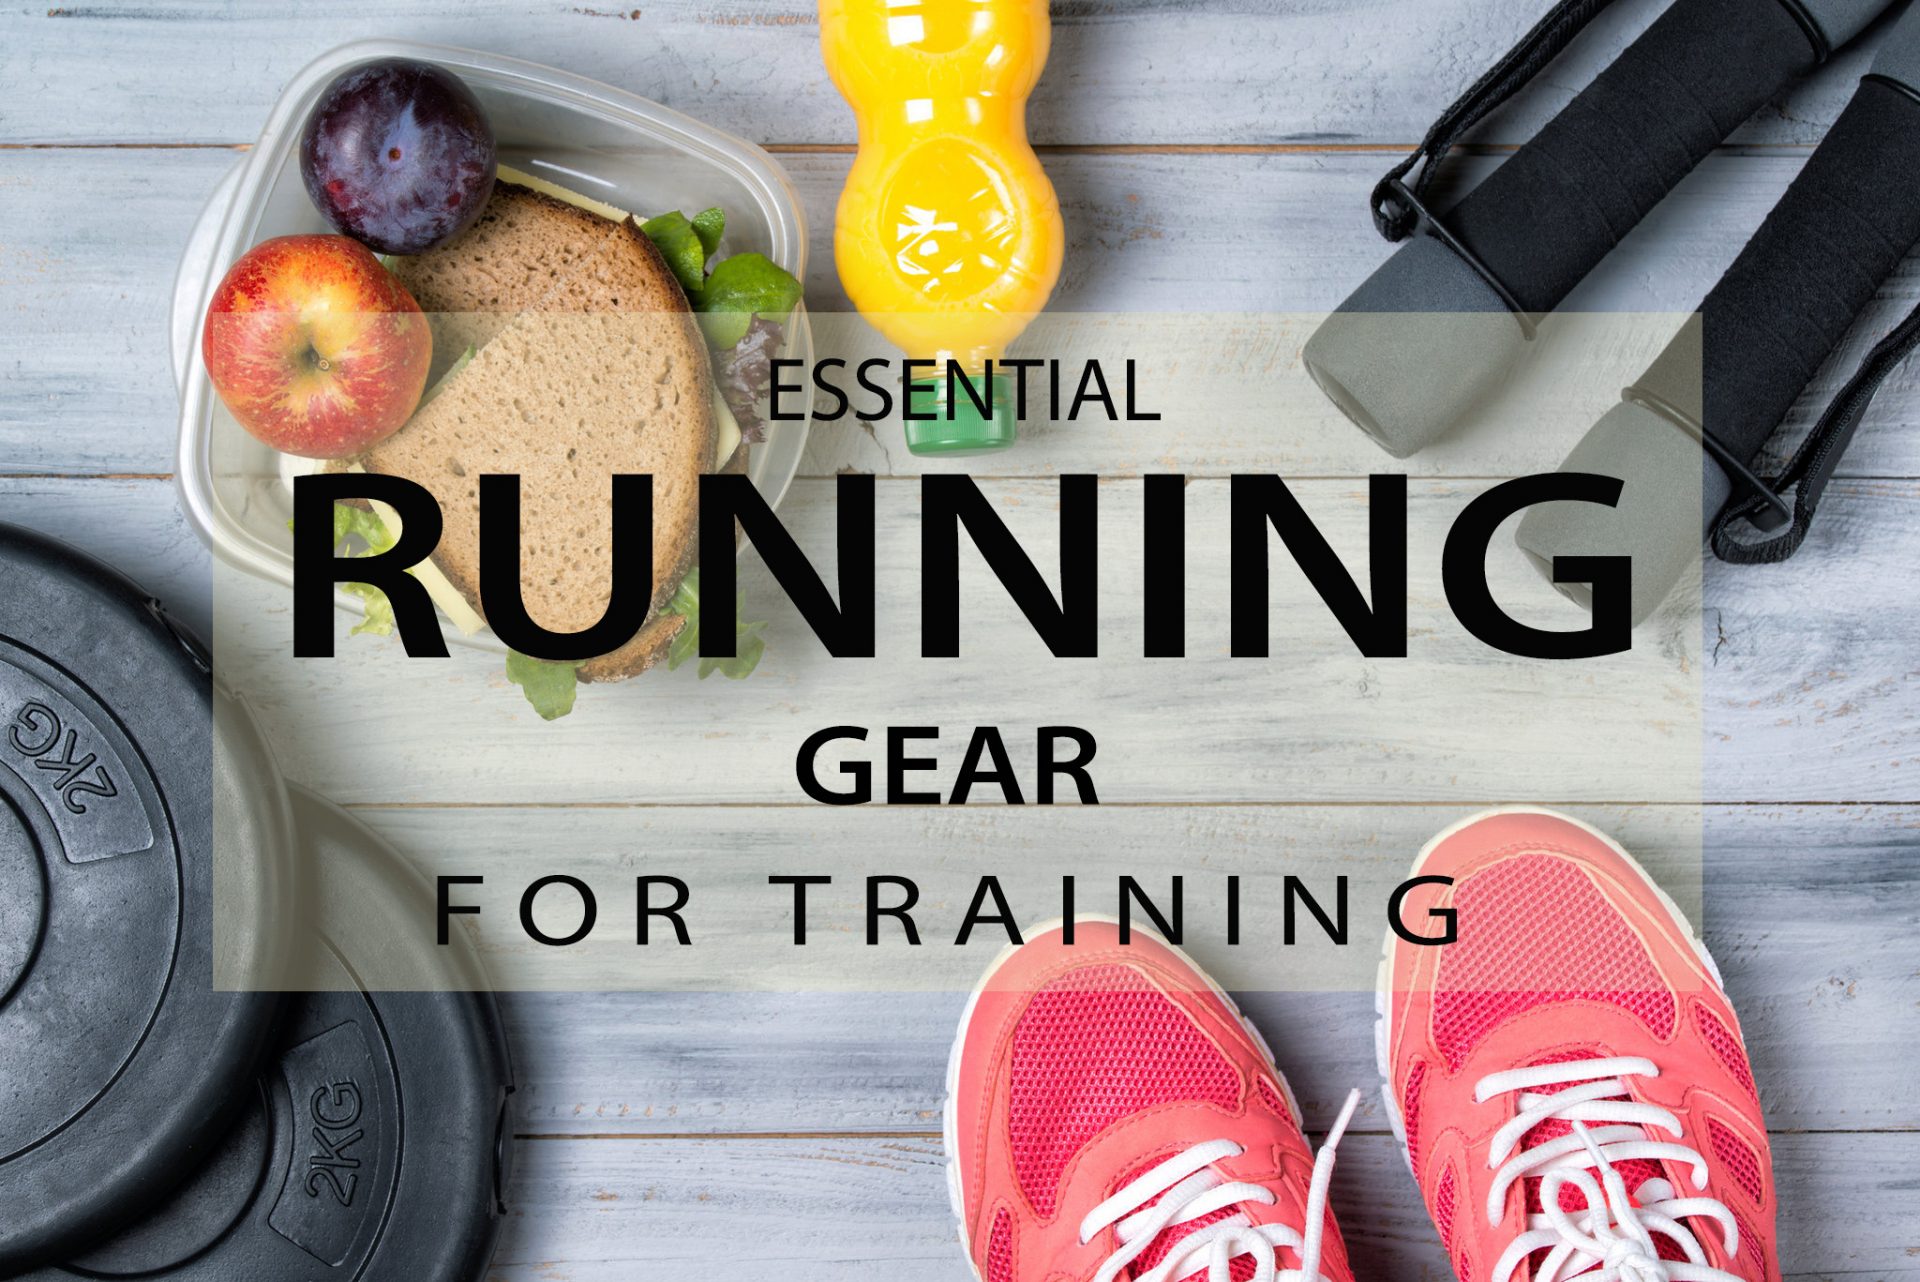 Essential Running Gear List That You Need for Training